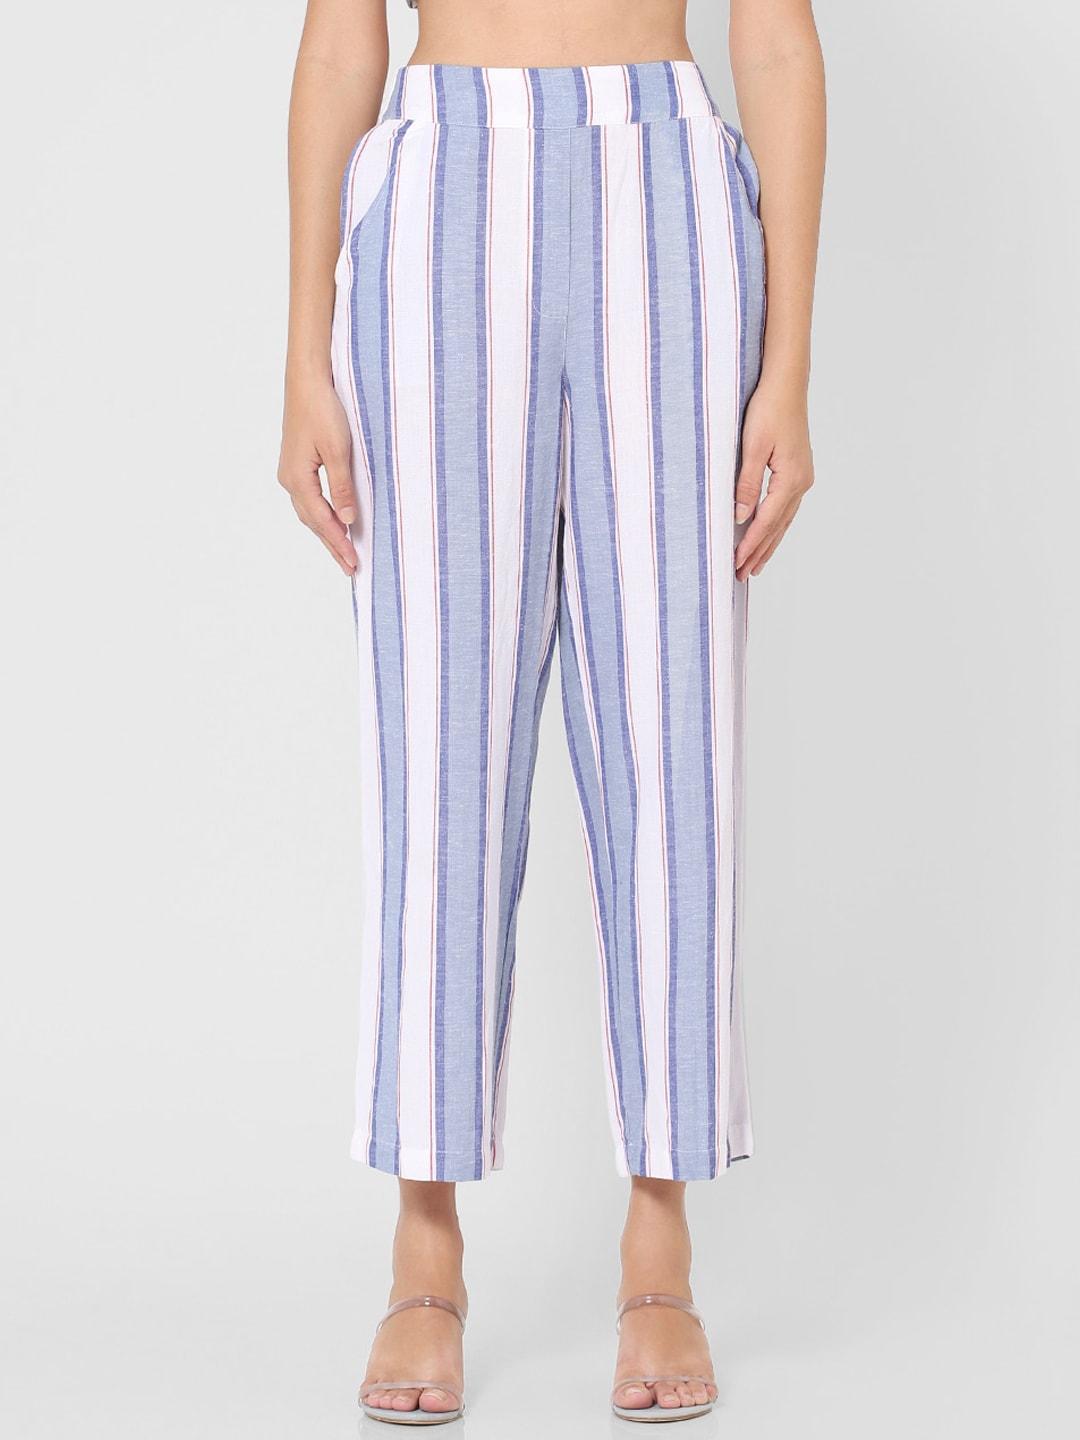 ONLY Women White & Blue Regular Fit Striped Parallel Trousers